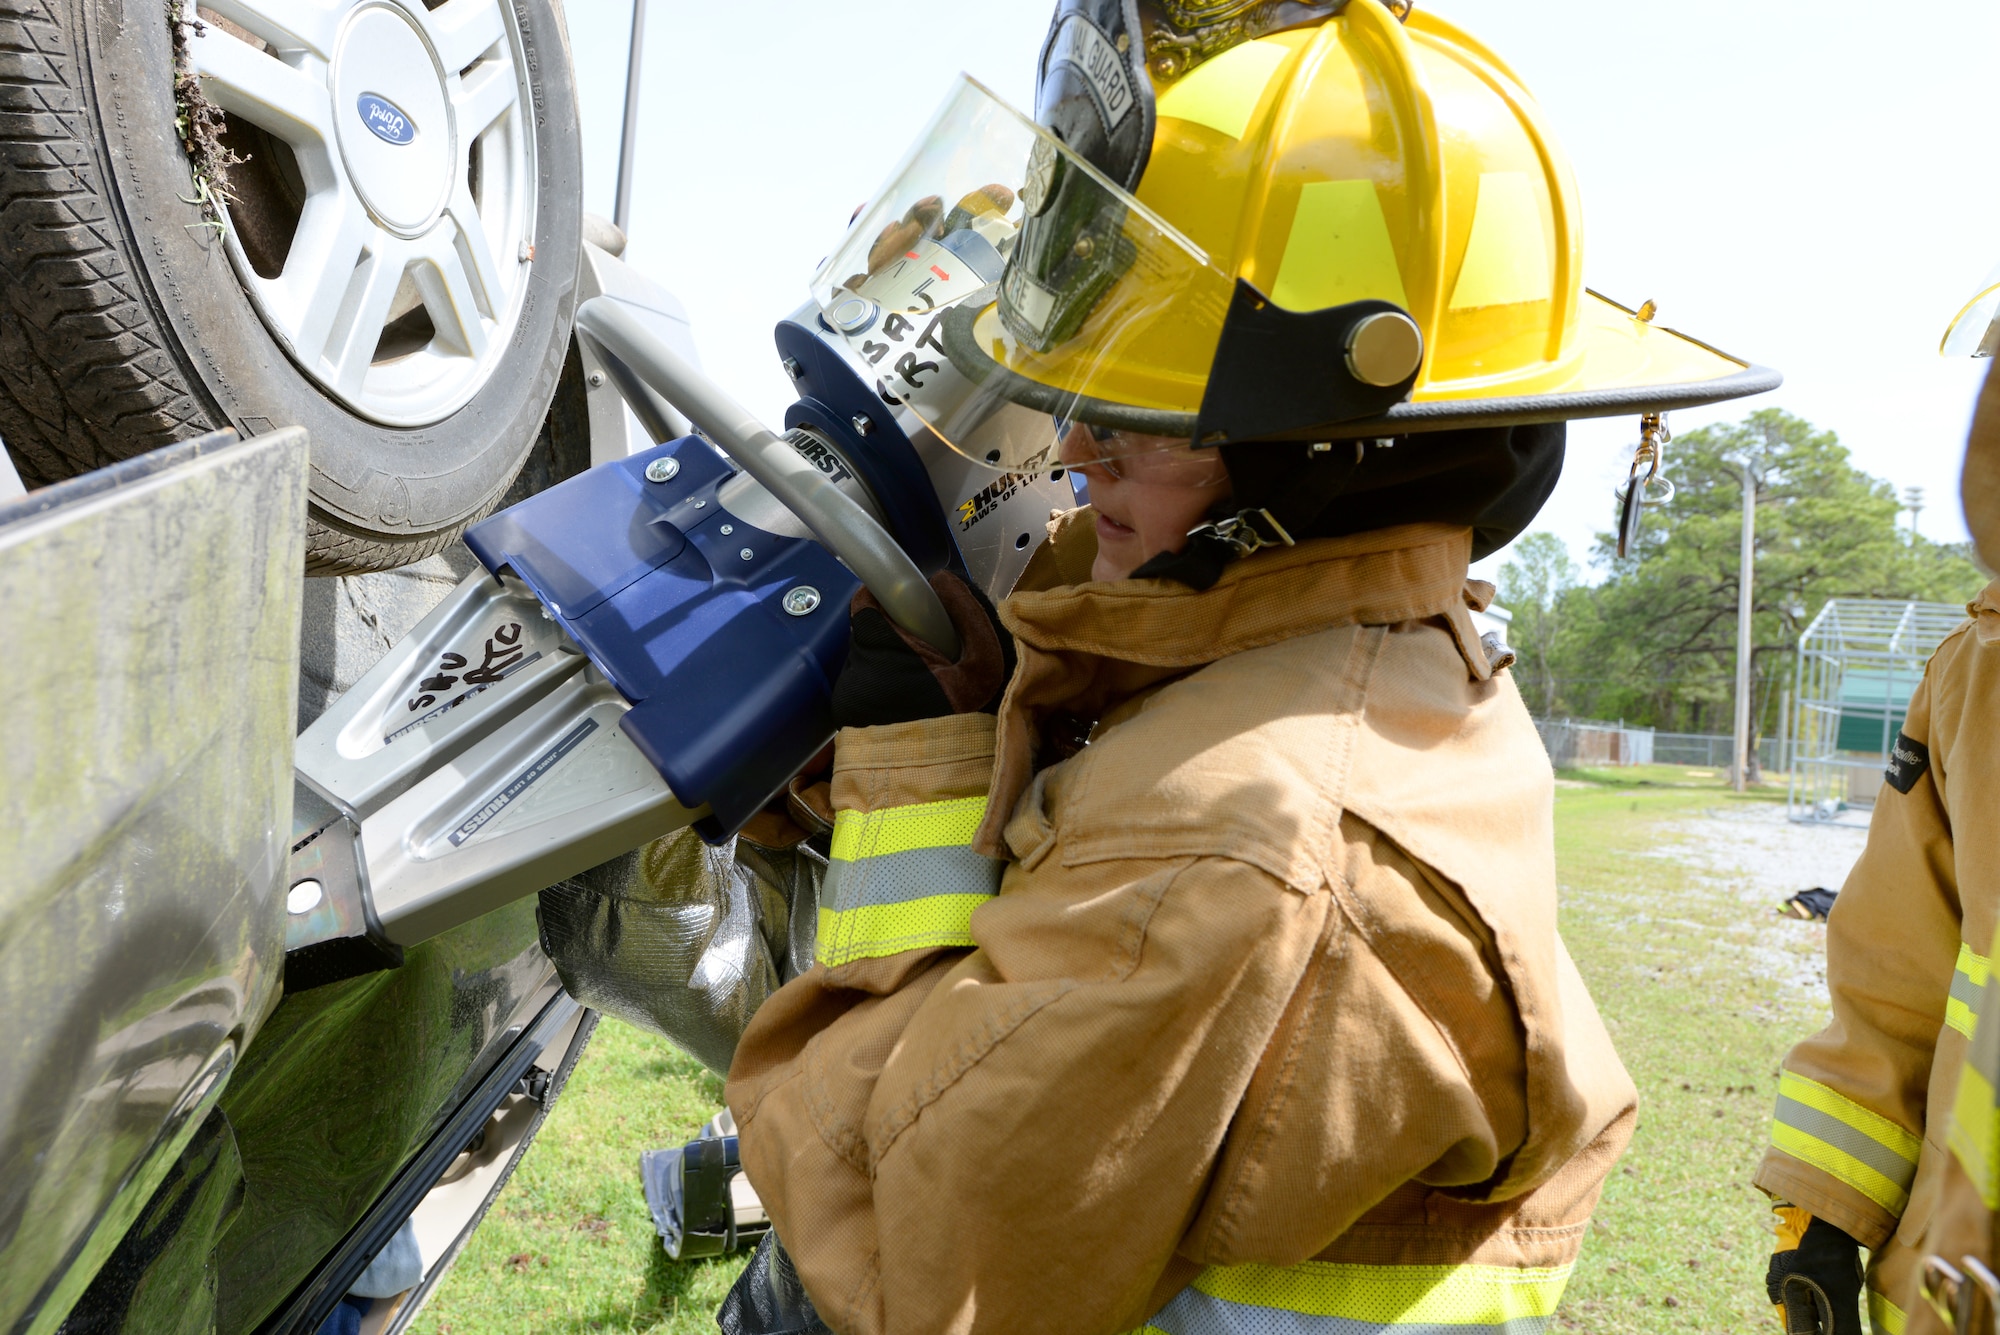 A picture of Senior Airman Katelyn Mosley of the 101st Airlift Wing Fire Department, Maine Air National Guard, utilizing a Hurst spreader to open a vehicle door.